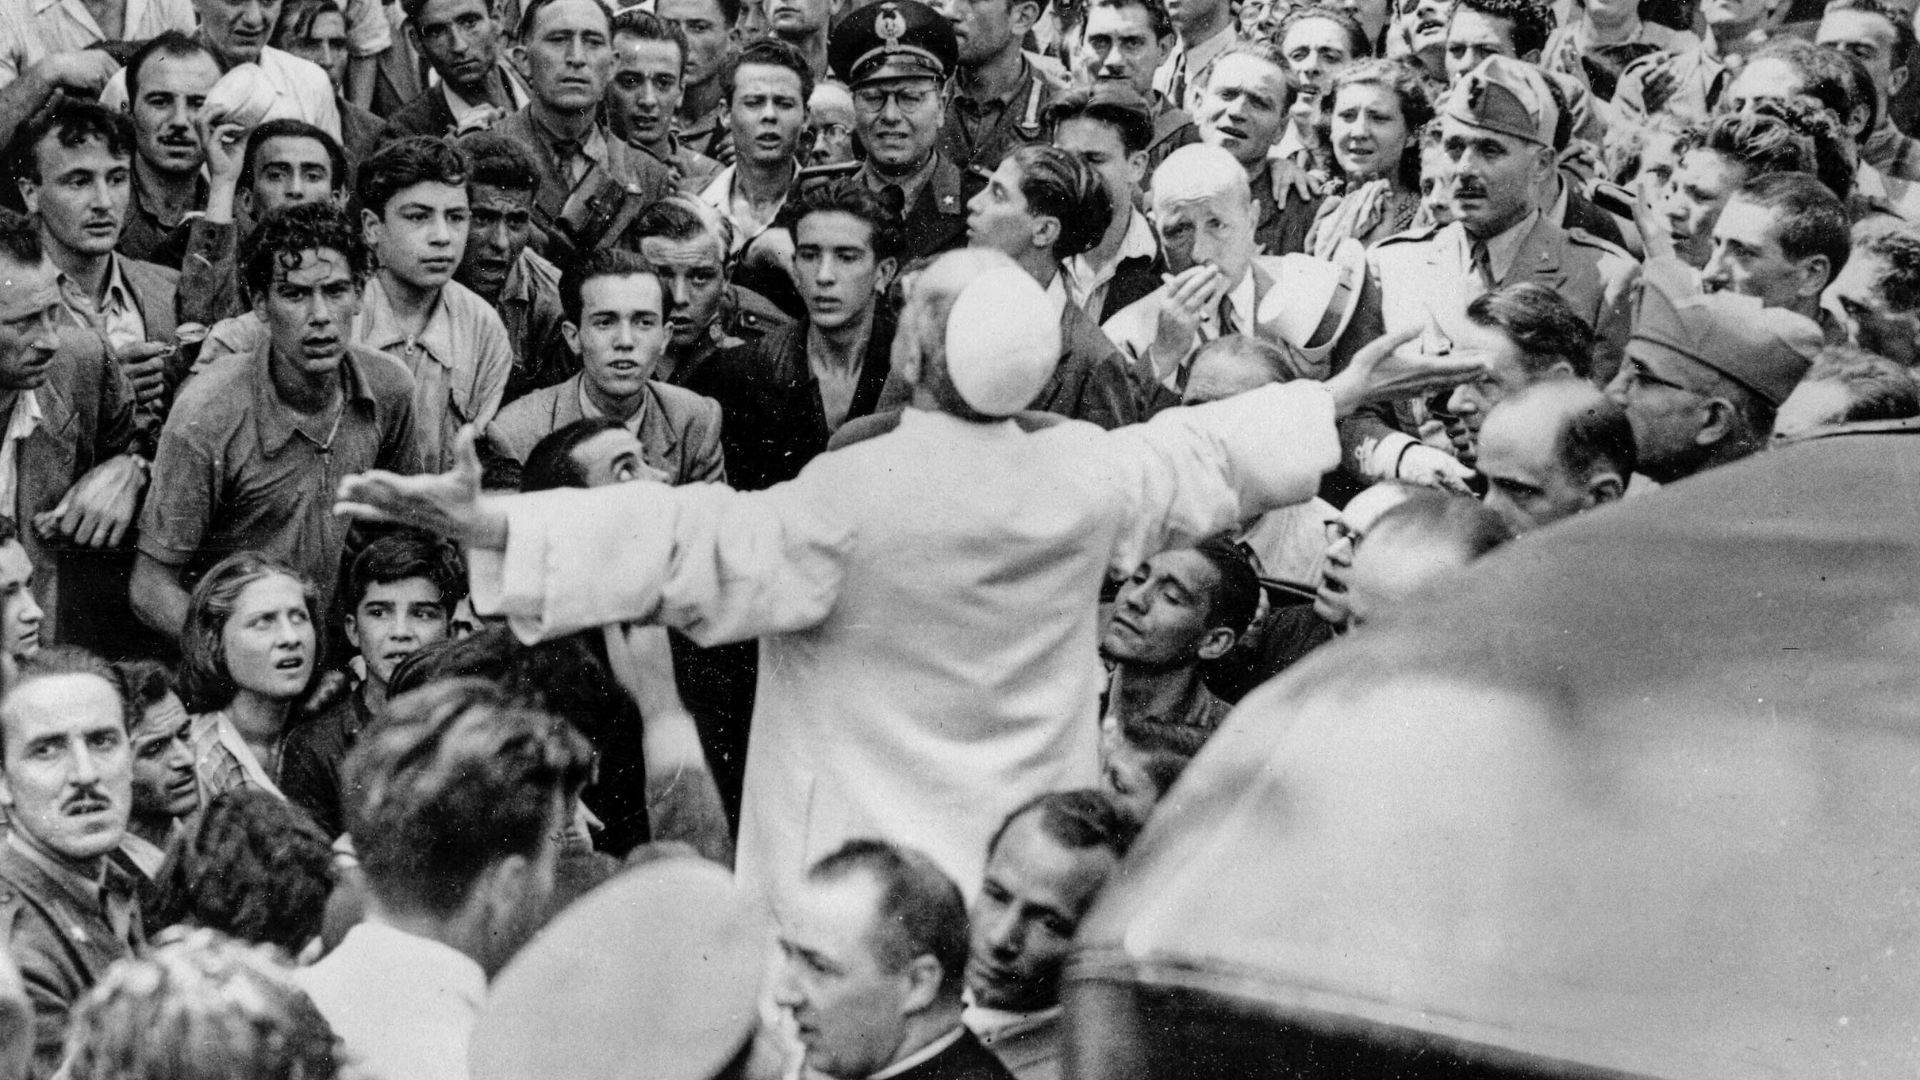 Pope Pius XII visits the Lateran after the bombing of Rome in 1943 1